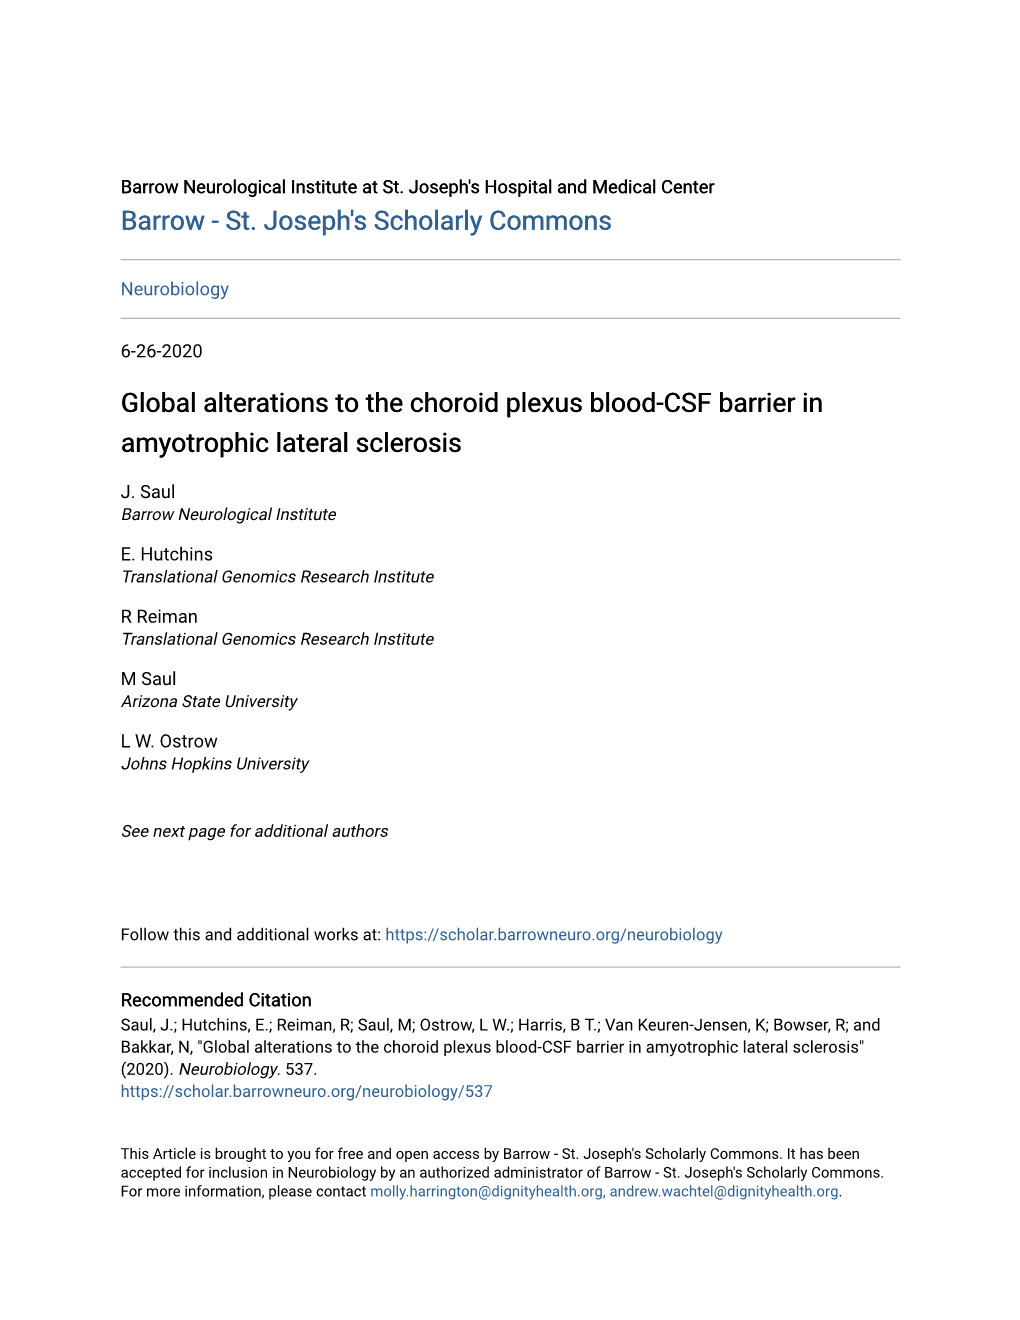 Global Alterations to the Choroid Plexus Blood-CSF Barrier in Amyotrophic Lateral Sclerosis